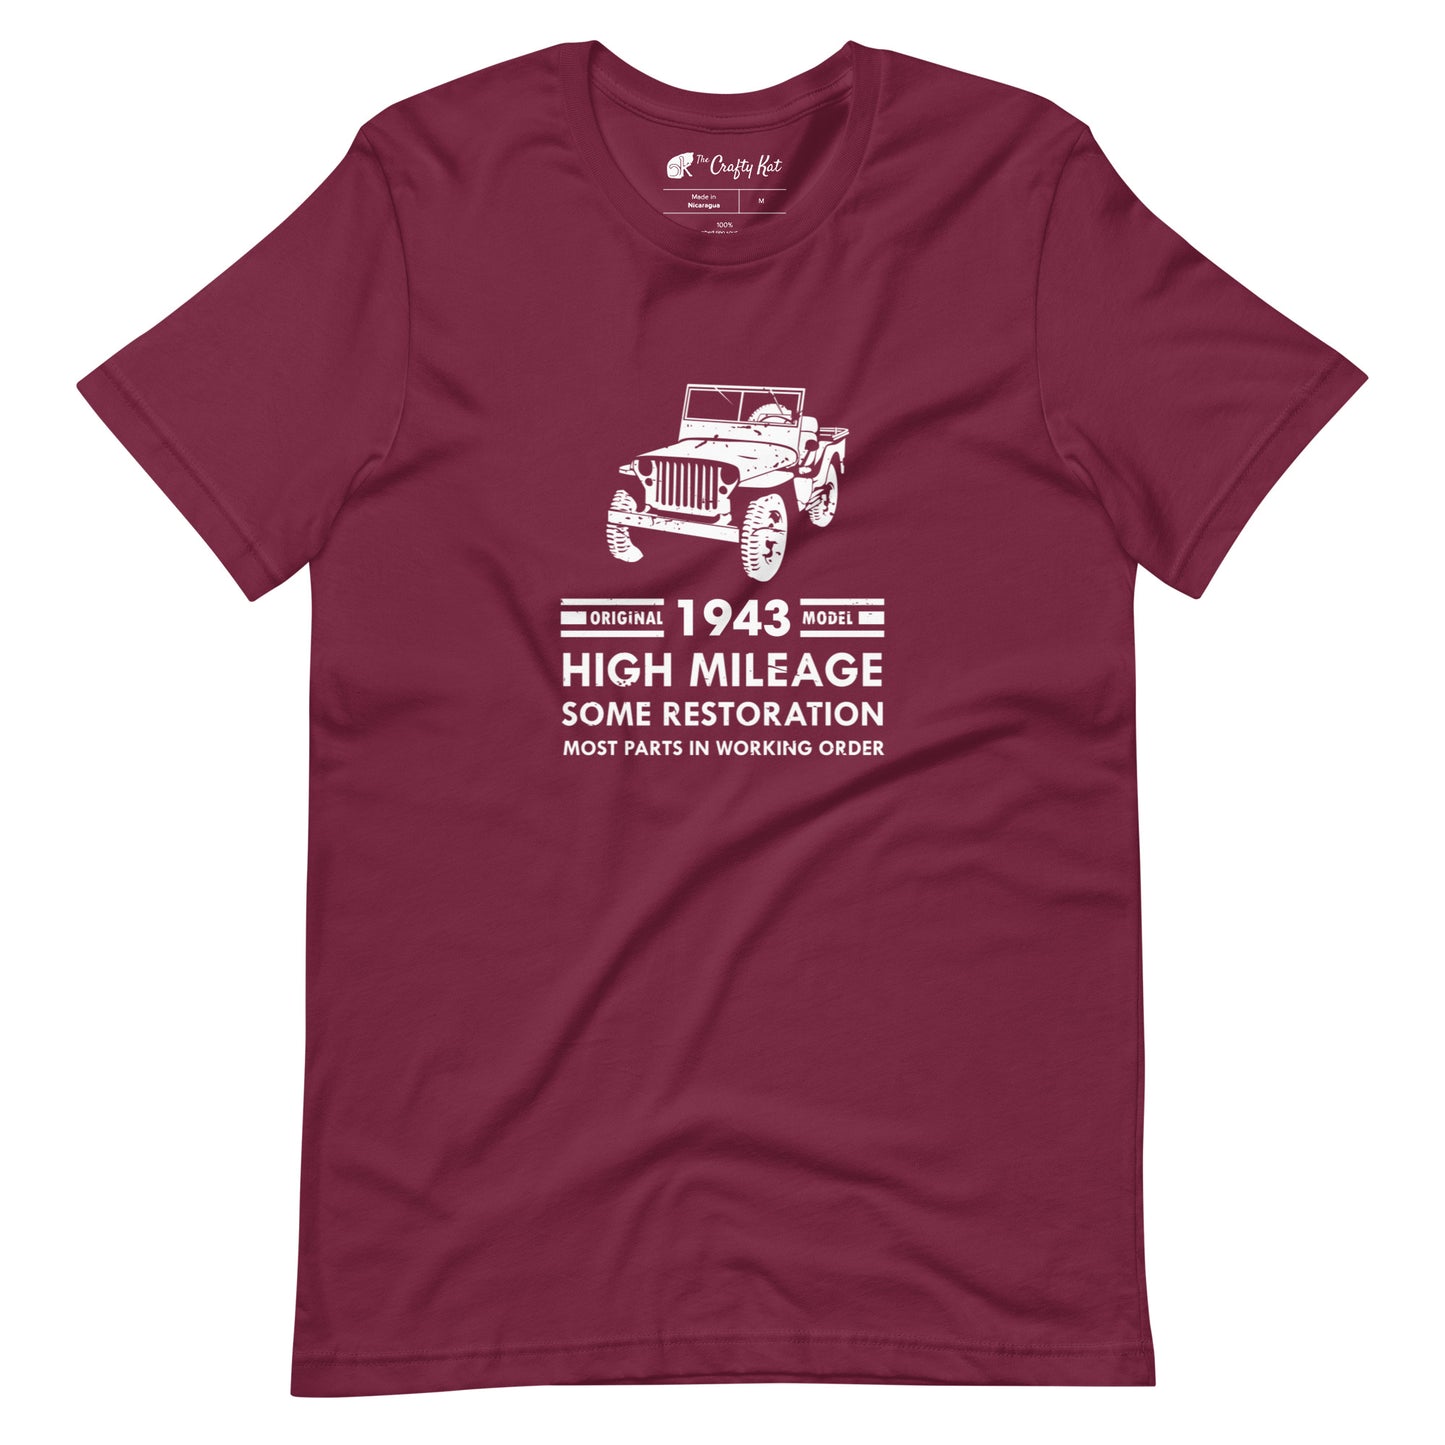 Maroon t-shirt with distressed graphic of old military jeep and text "Original YEAR model HIGH MILEAGE some restoration MOST PARTS IN WORKING ORDER"